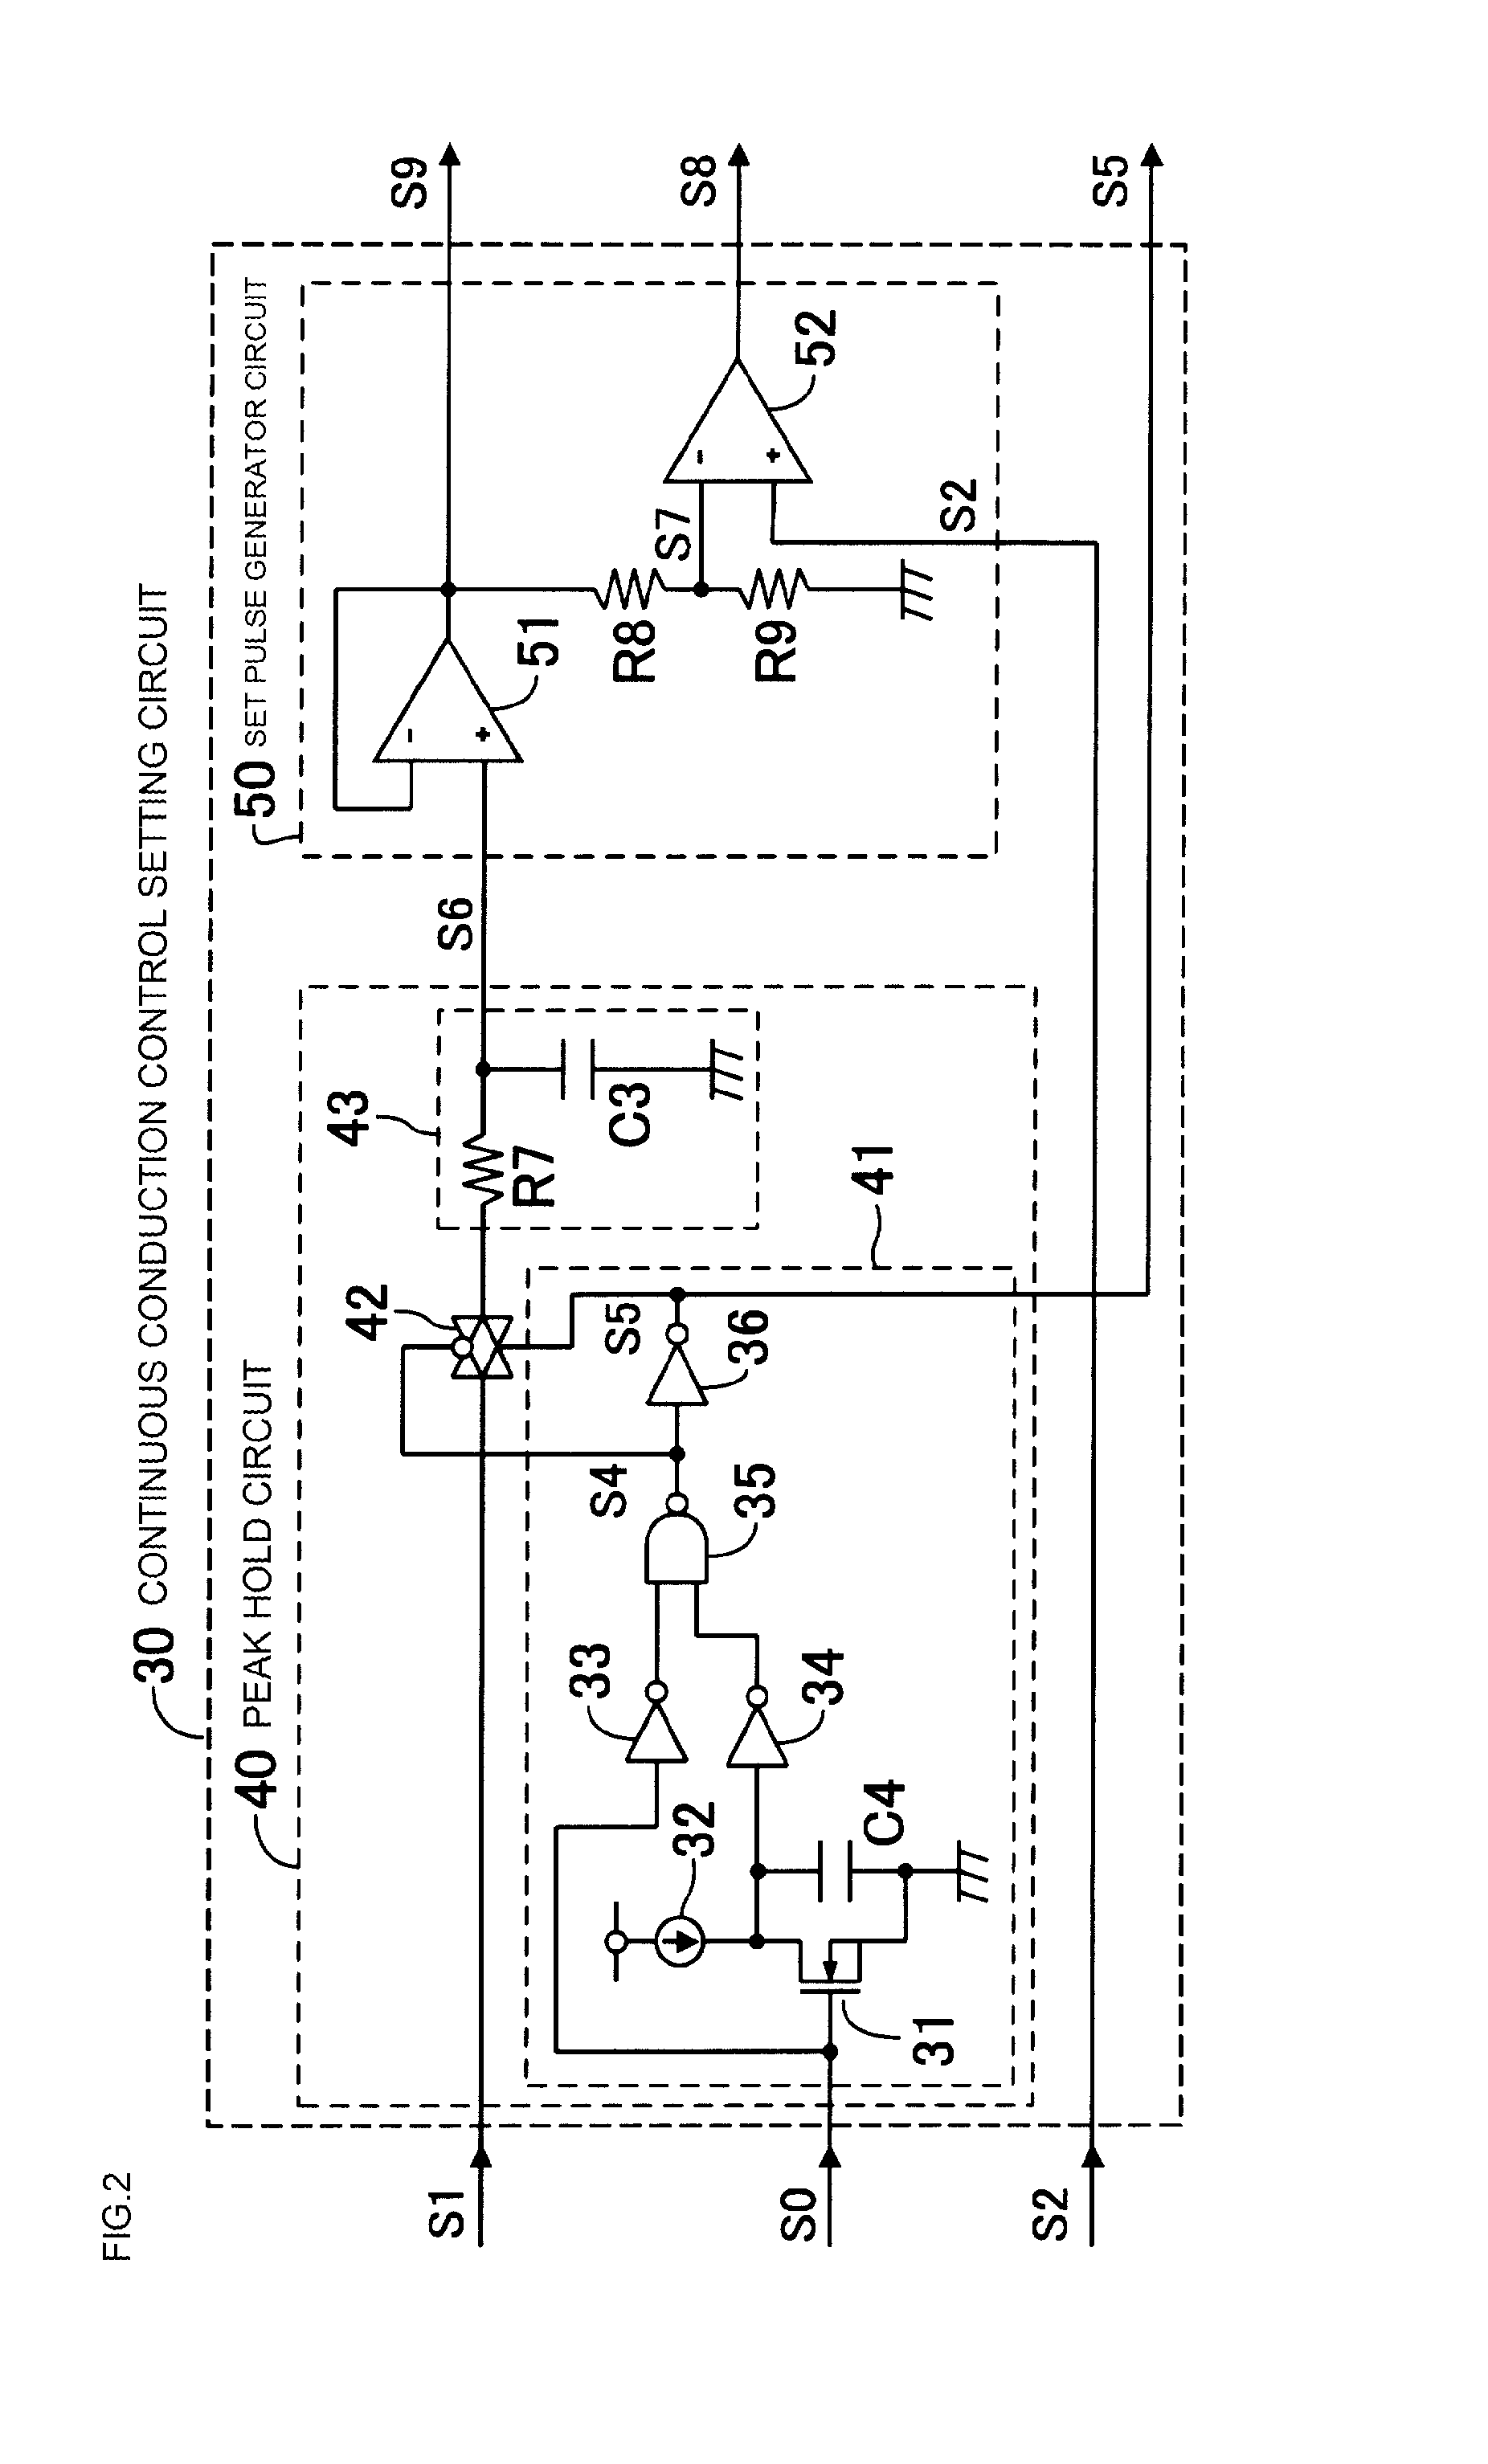 Switching power supply circuit and power factor correction circuit